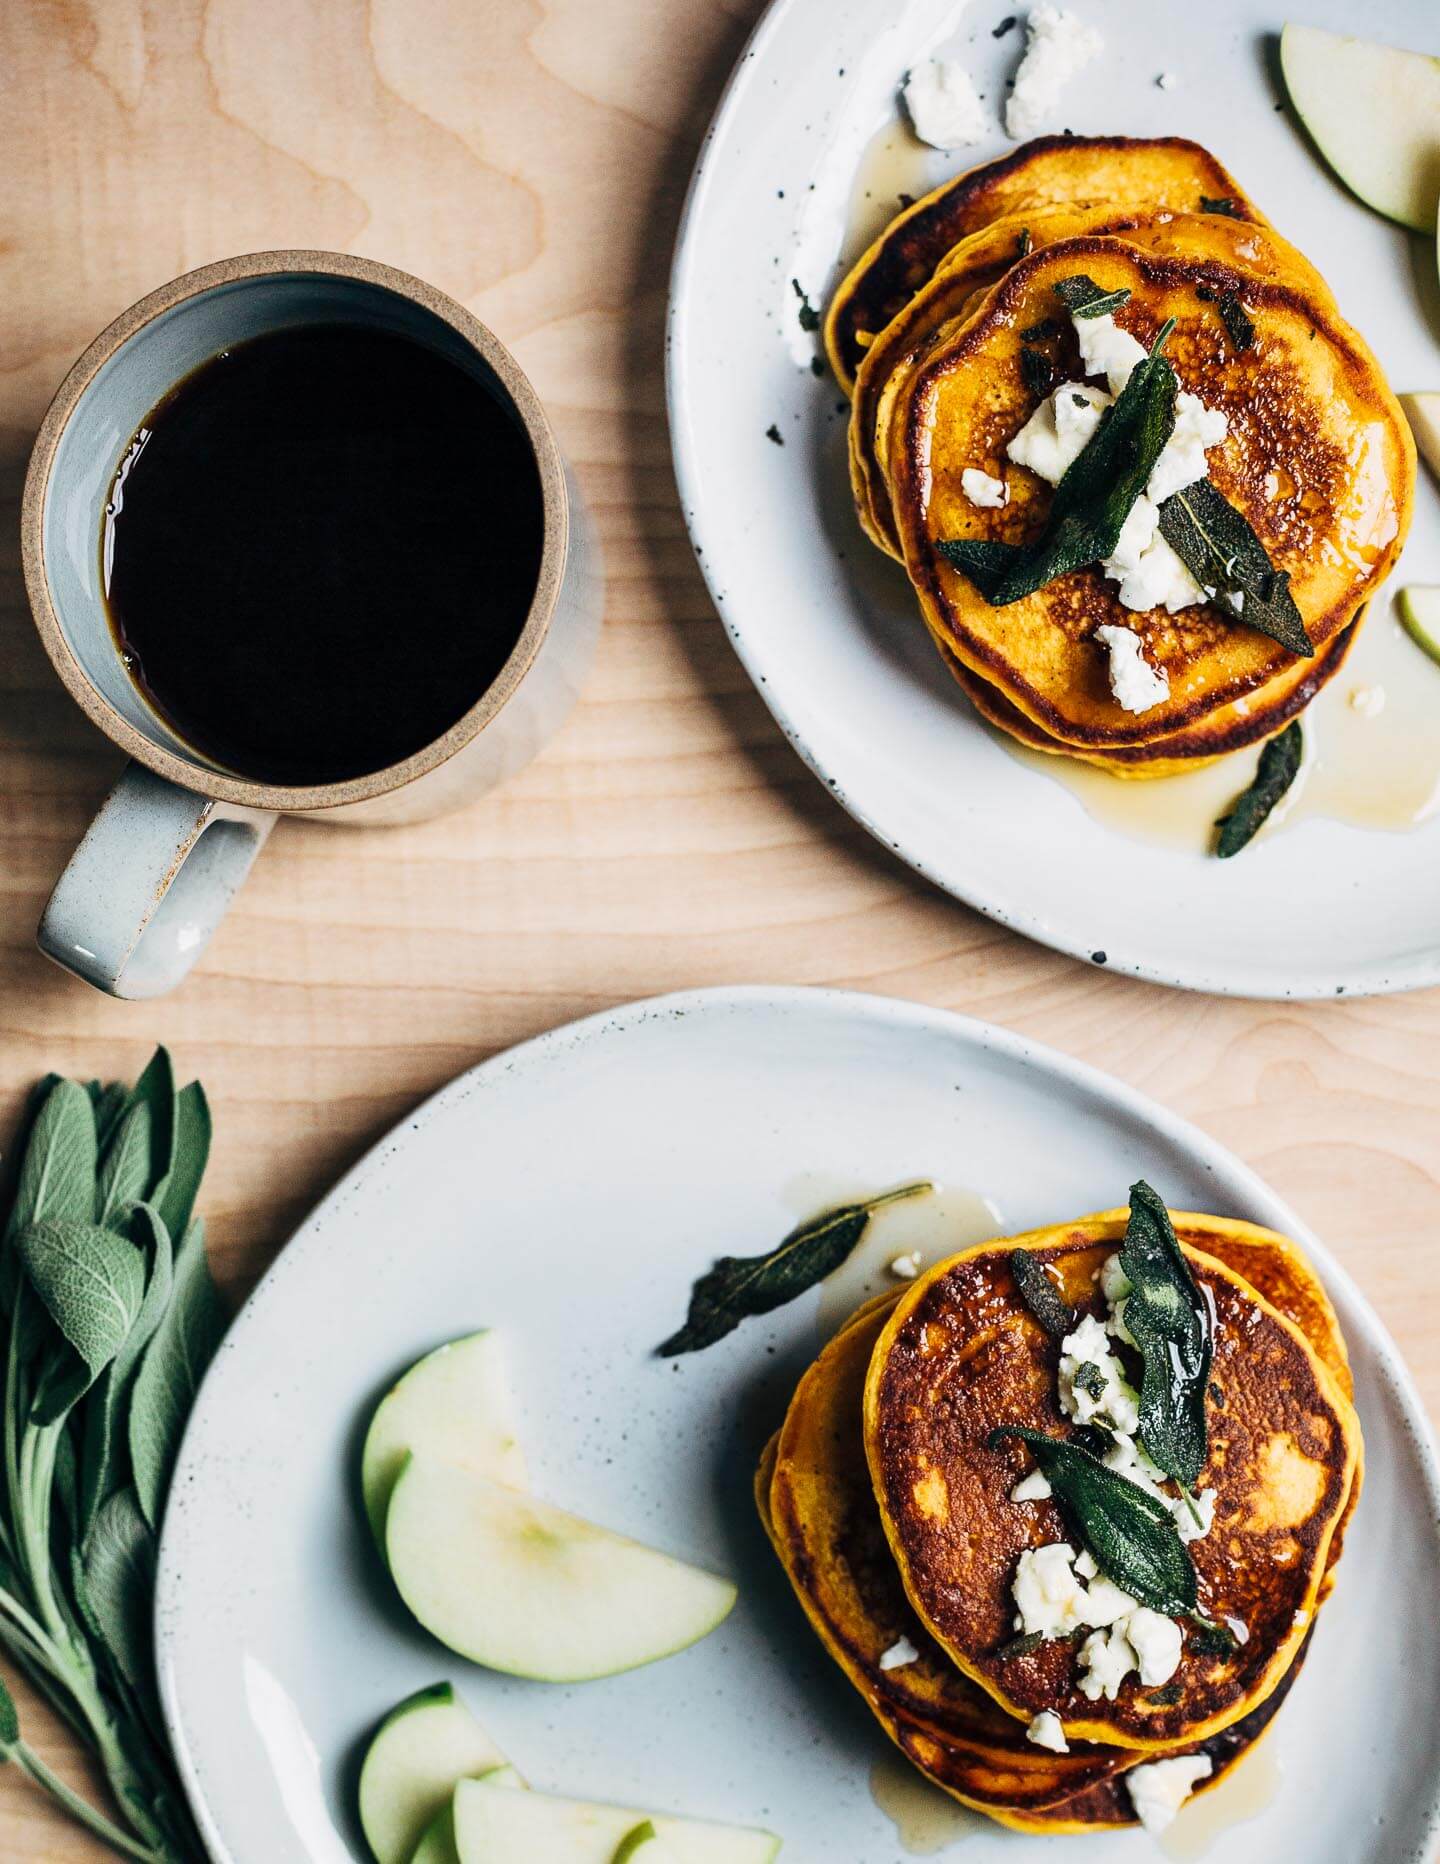 An autumnal sweet potato pancake recipe topped with fried sage leaves and crumbled goat cheese.